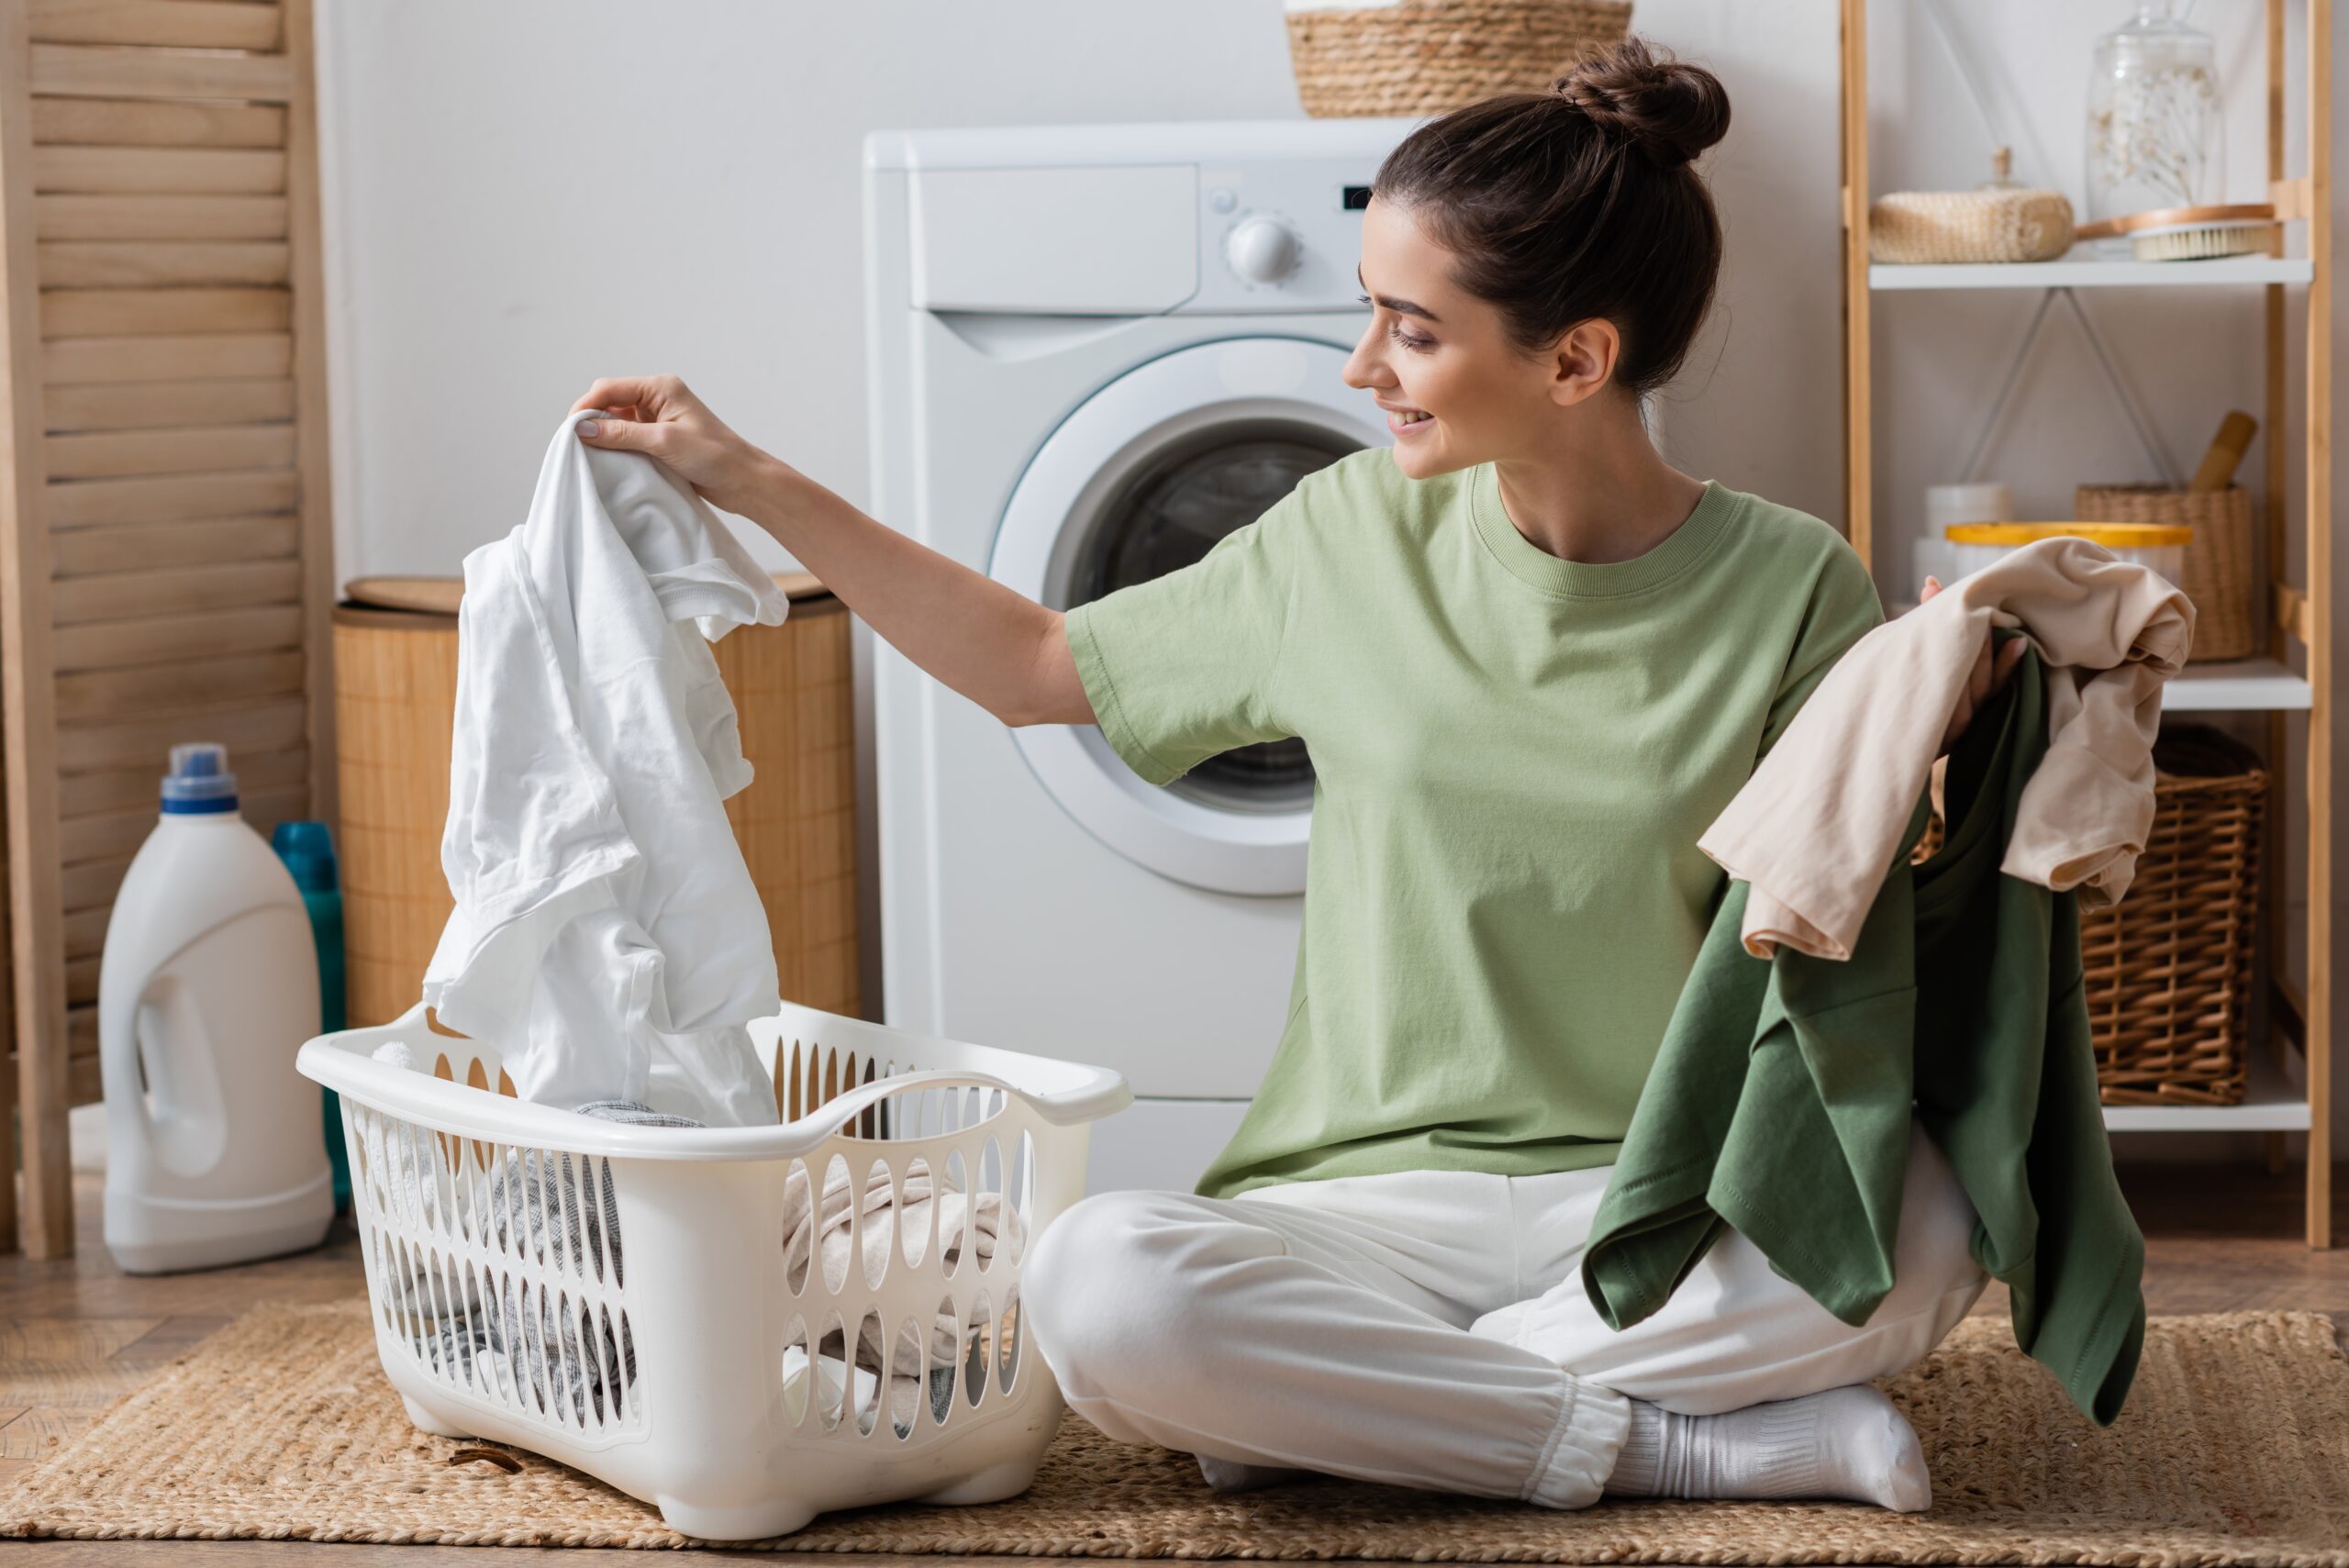 How to Separate Laundry